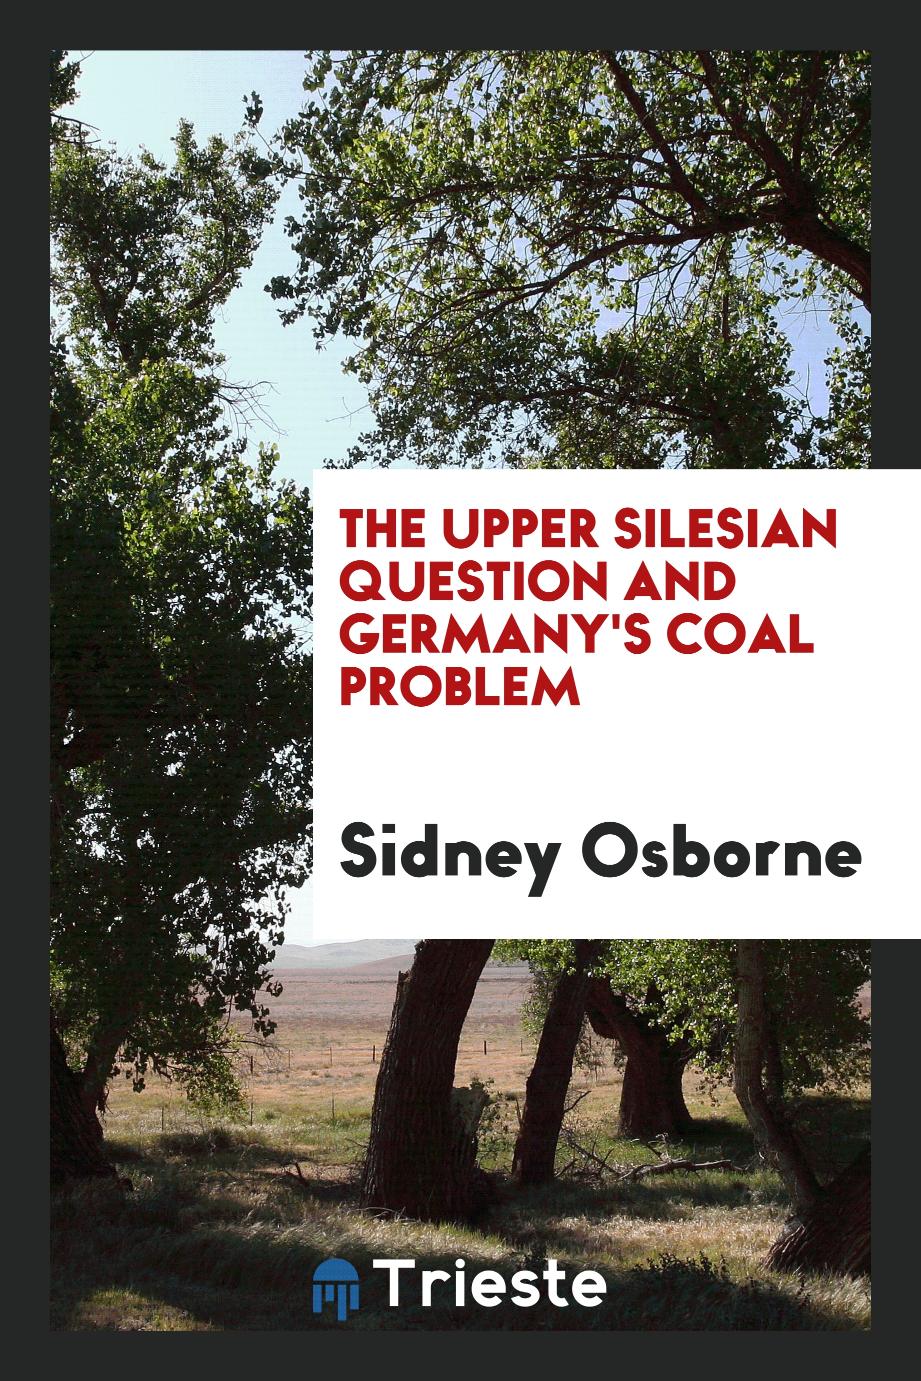 The Upper Silesian question and Germany's coal problem